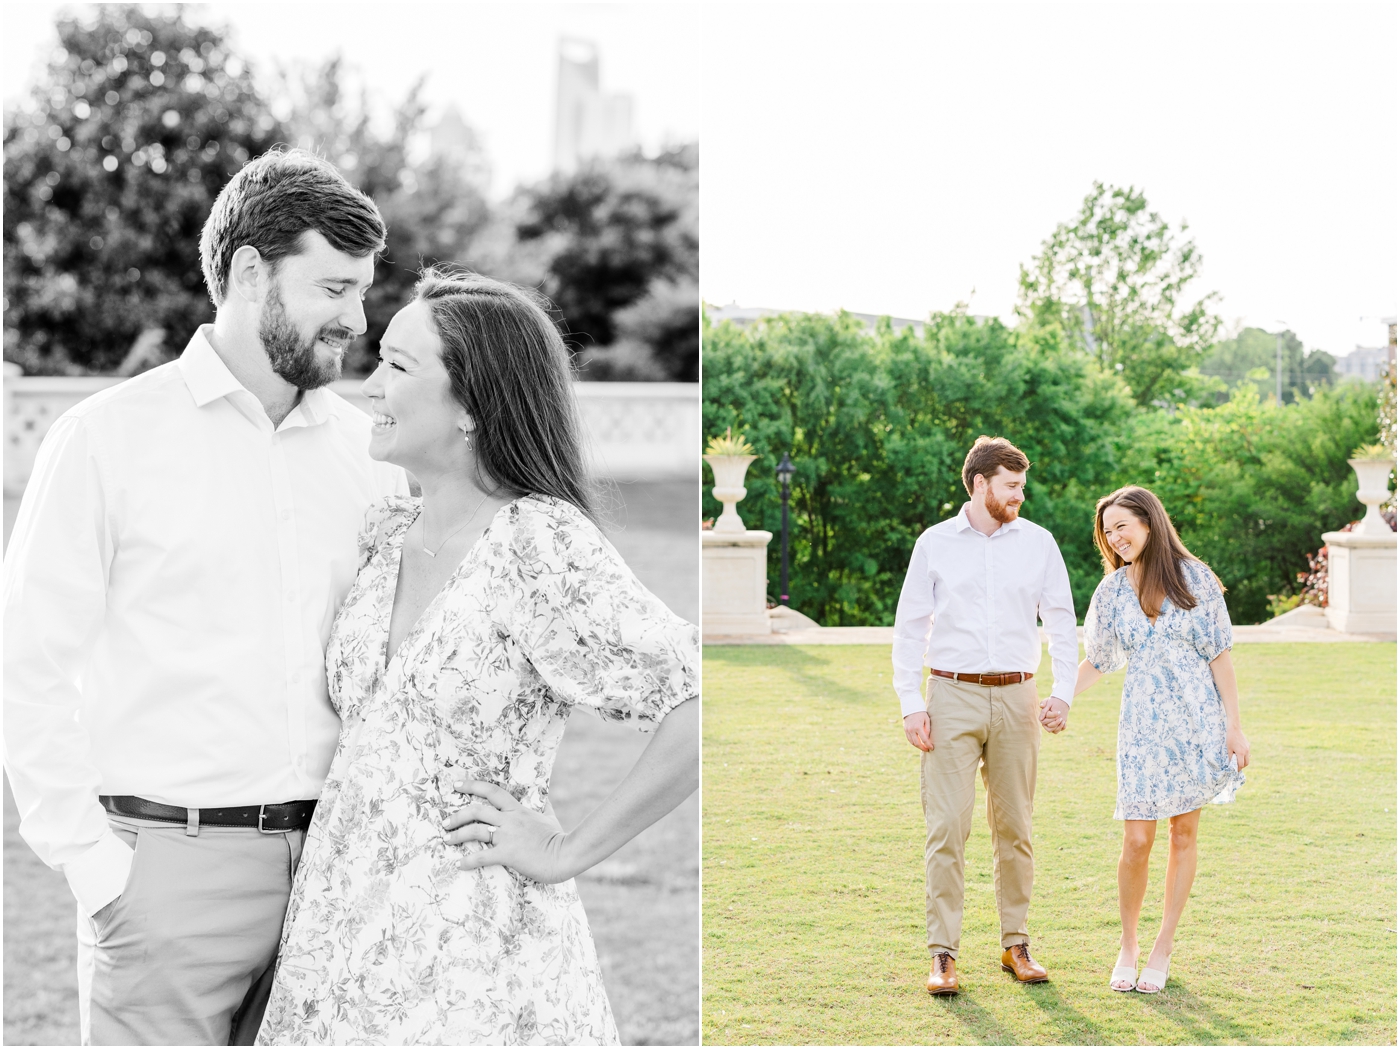 Midtown Park Engagement Session in Charlotte NC